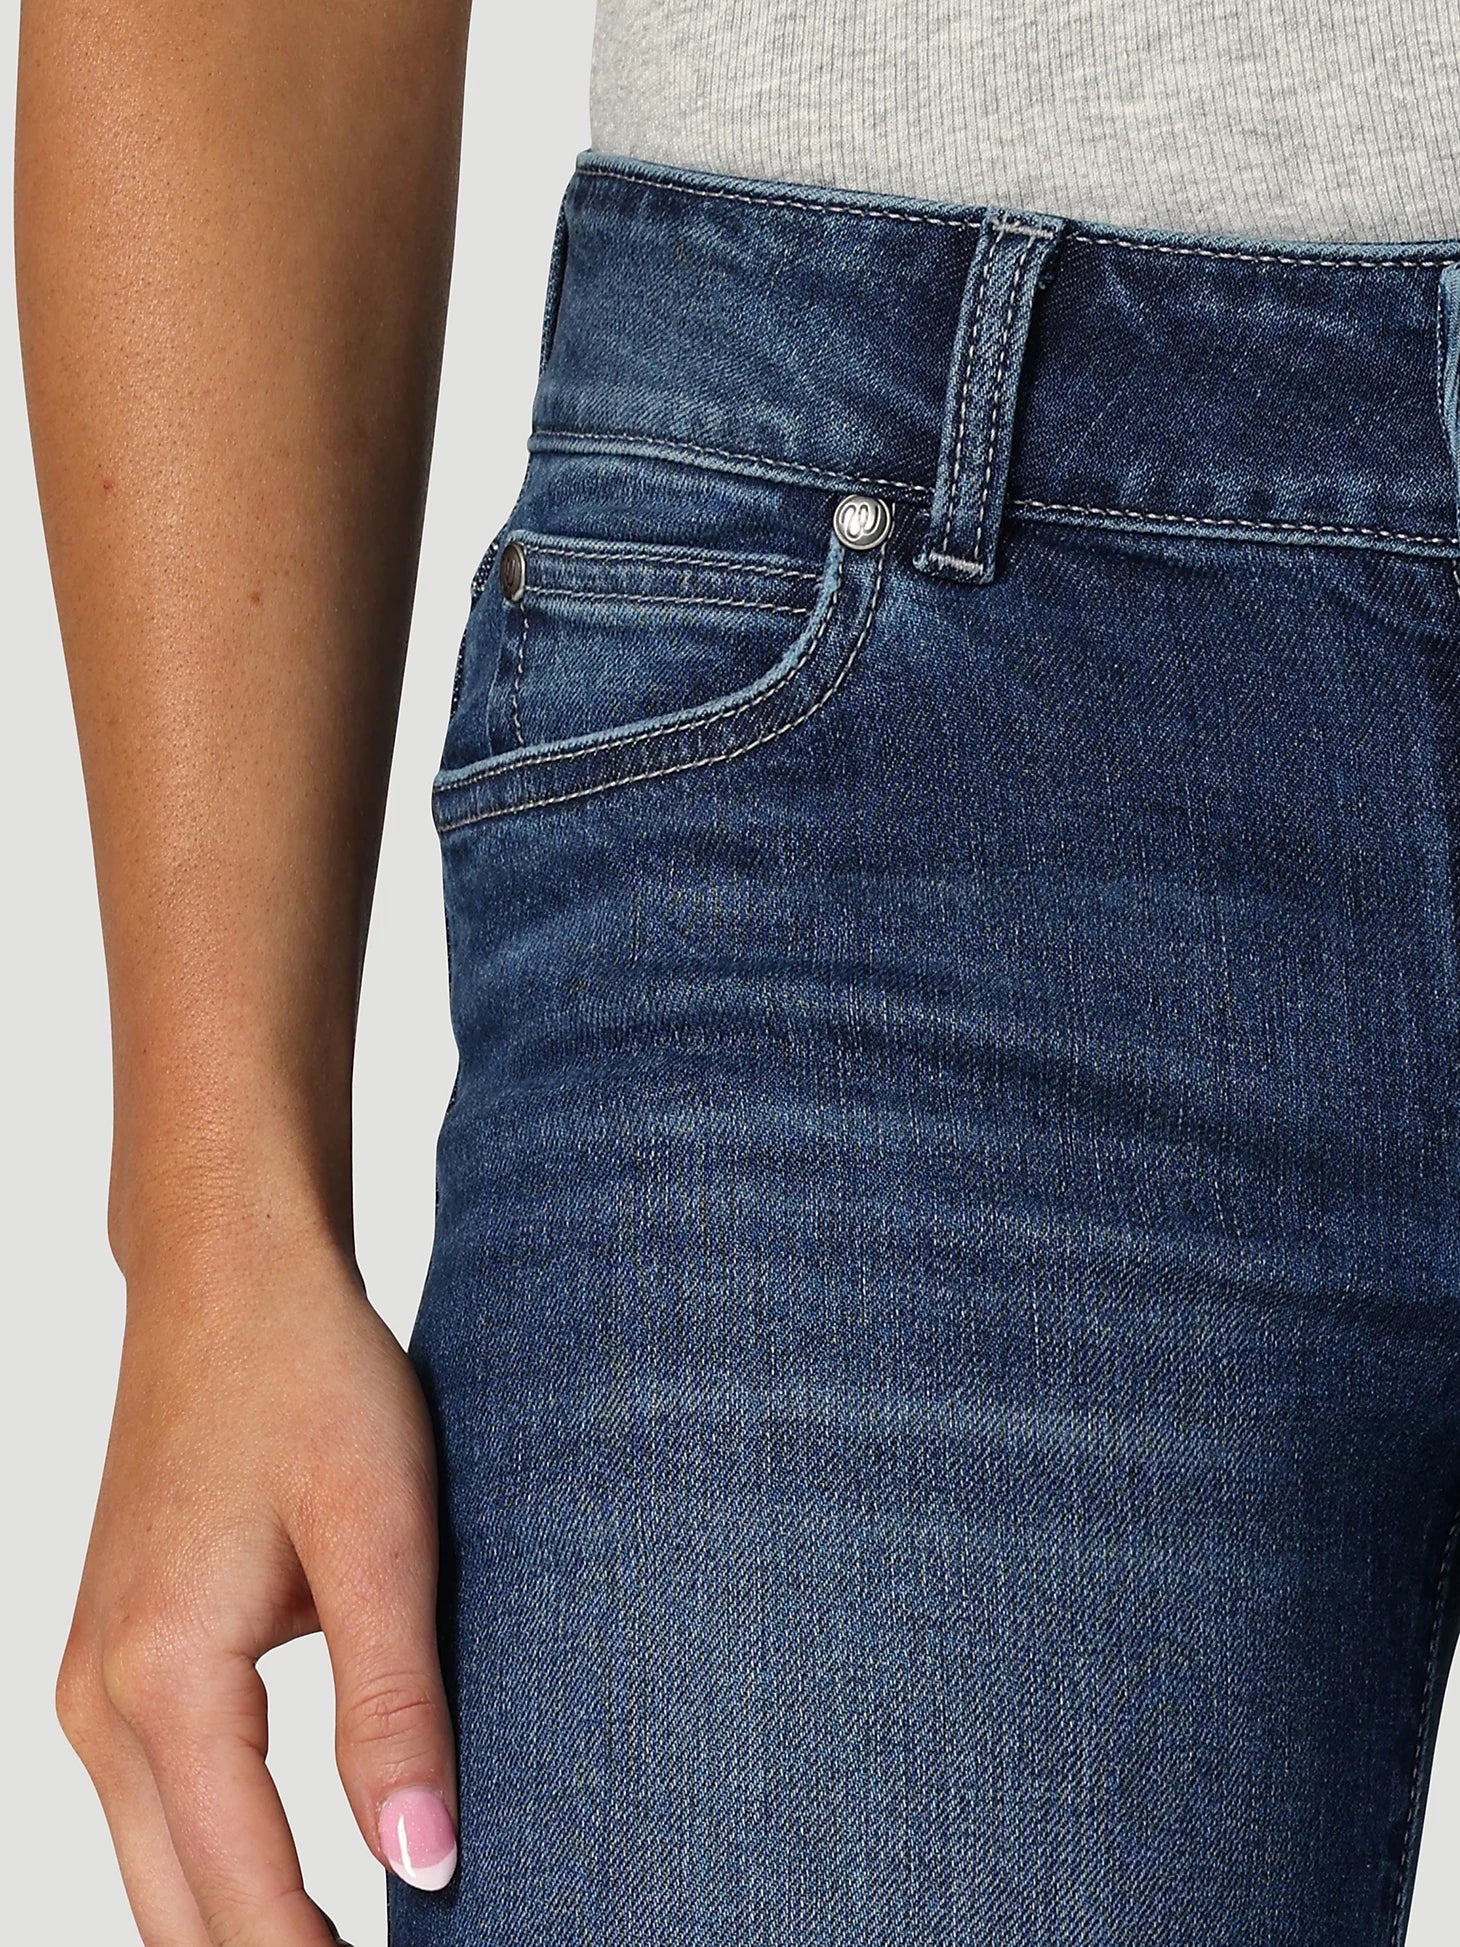 The Ultimate Try-On: 5 Pairs Of Gap Jeans - The Mom Edit